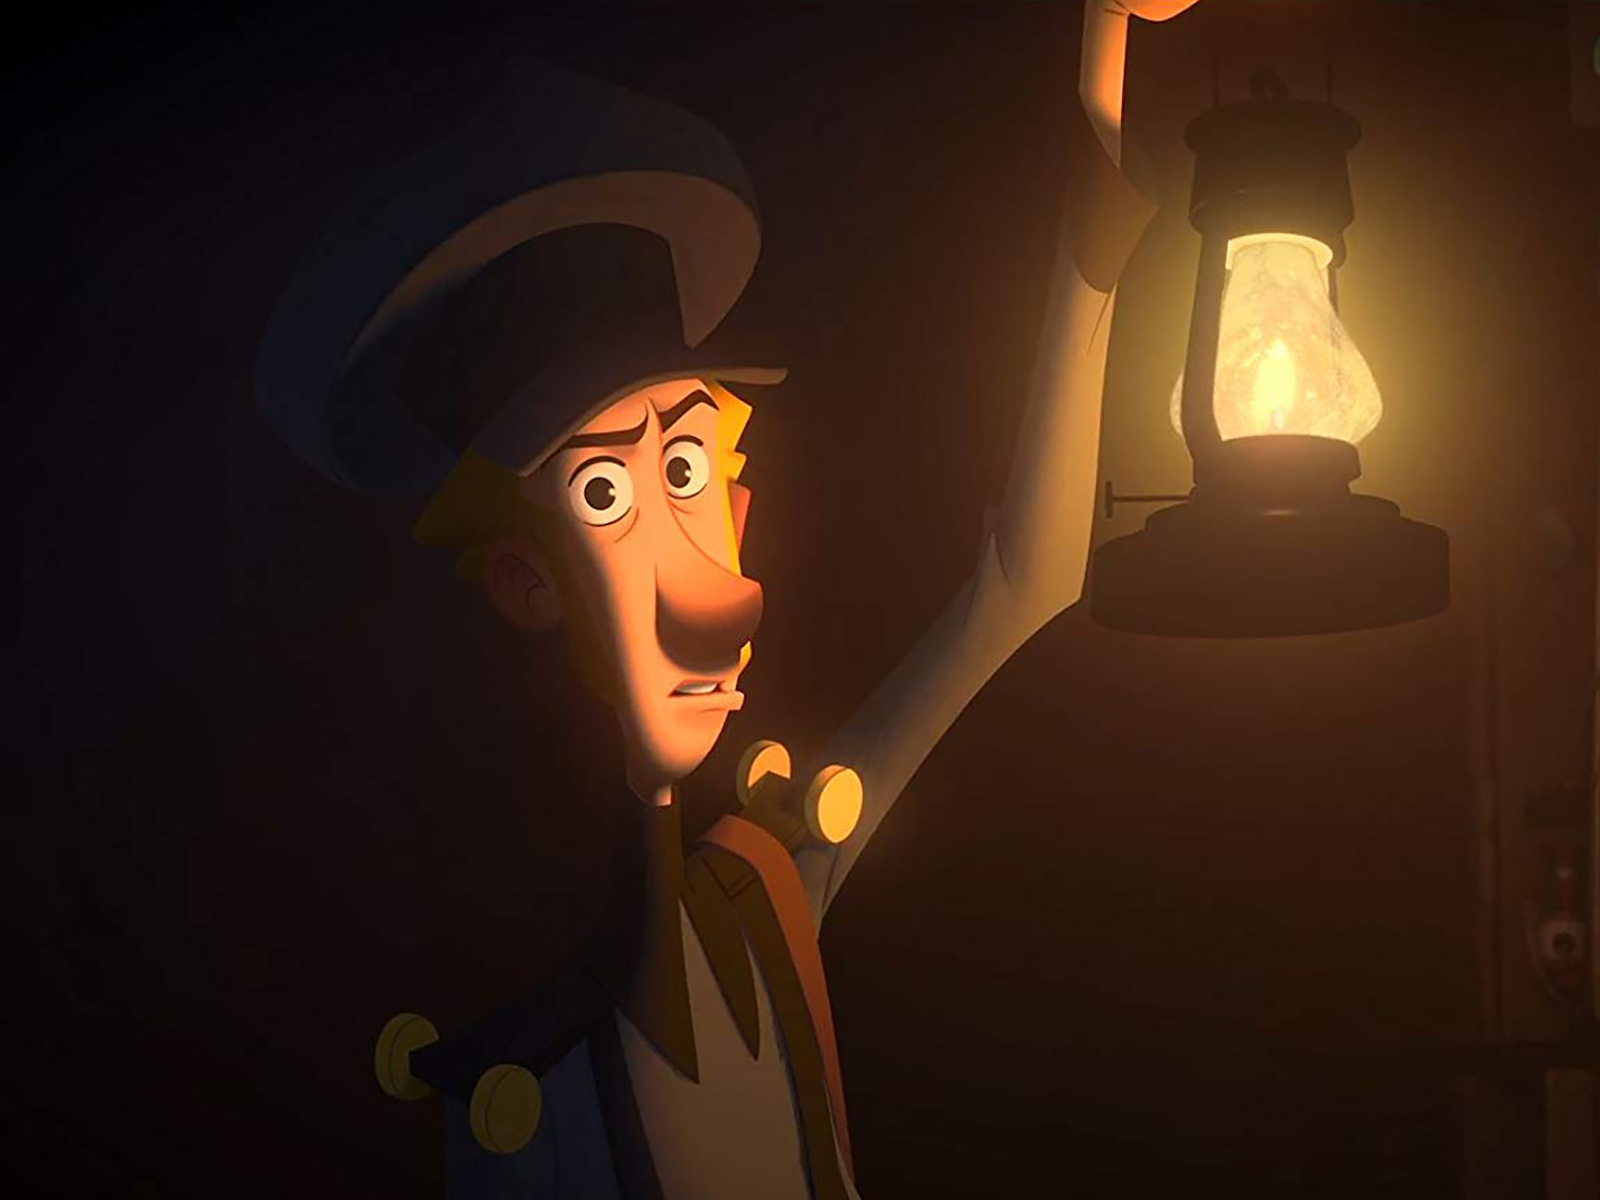 Still shot from the film Klaus: a postmaster holds a lantern in a dark room, revealing shelves of toys.